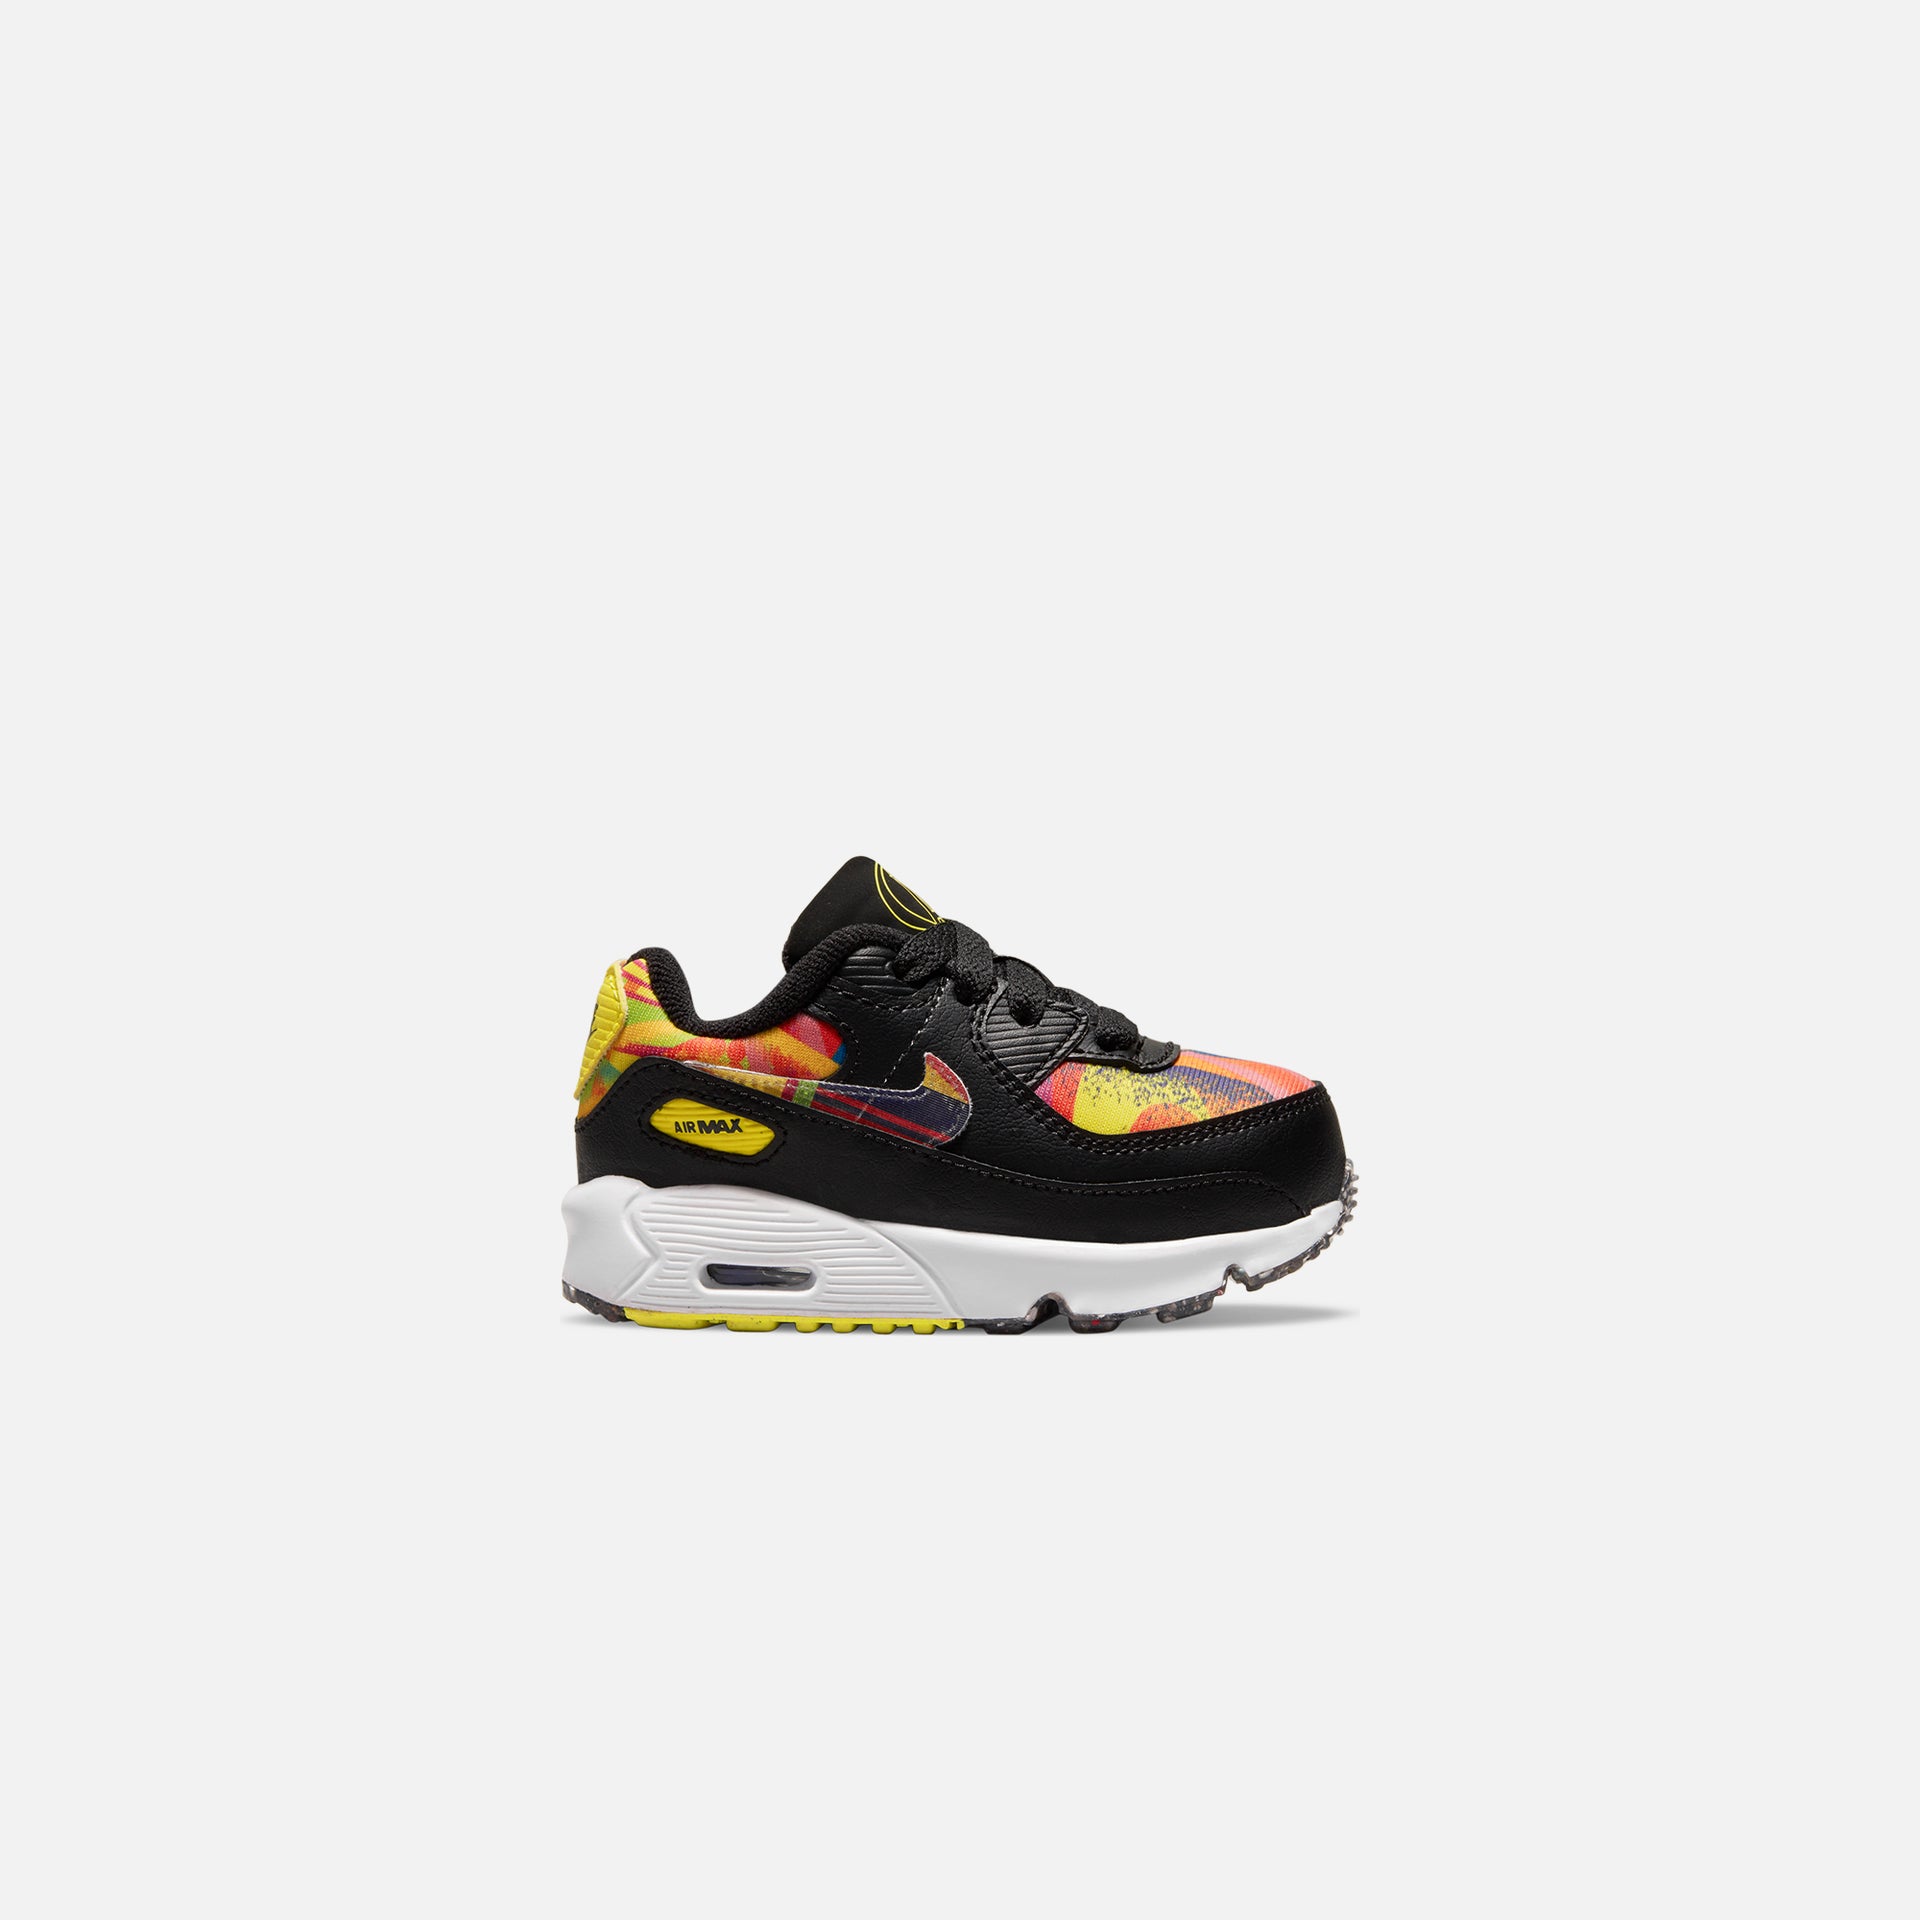 Nike Toddler Air Max 90 LHM - Multicolor / Fire Pink / Black / White